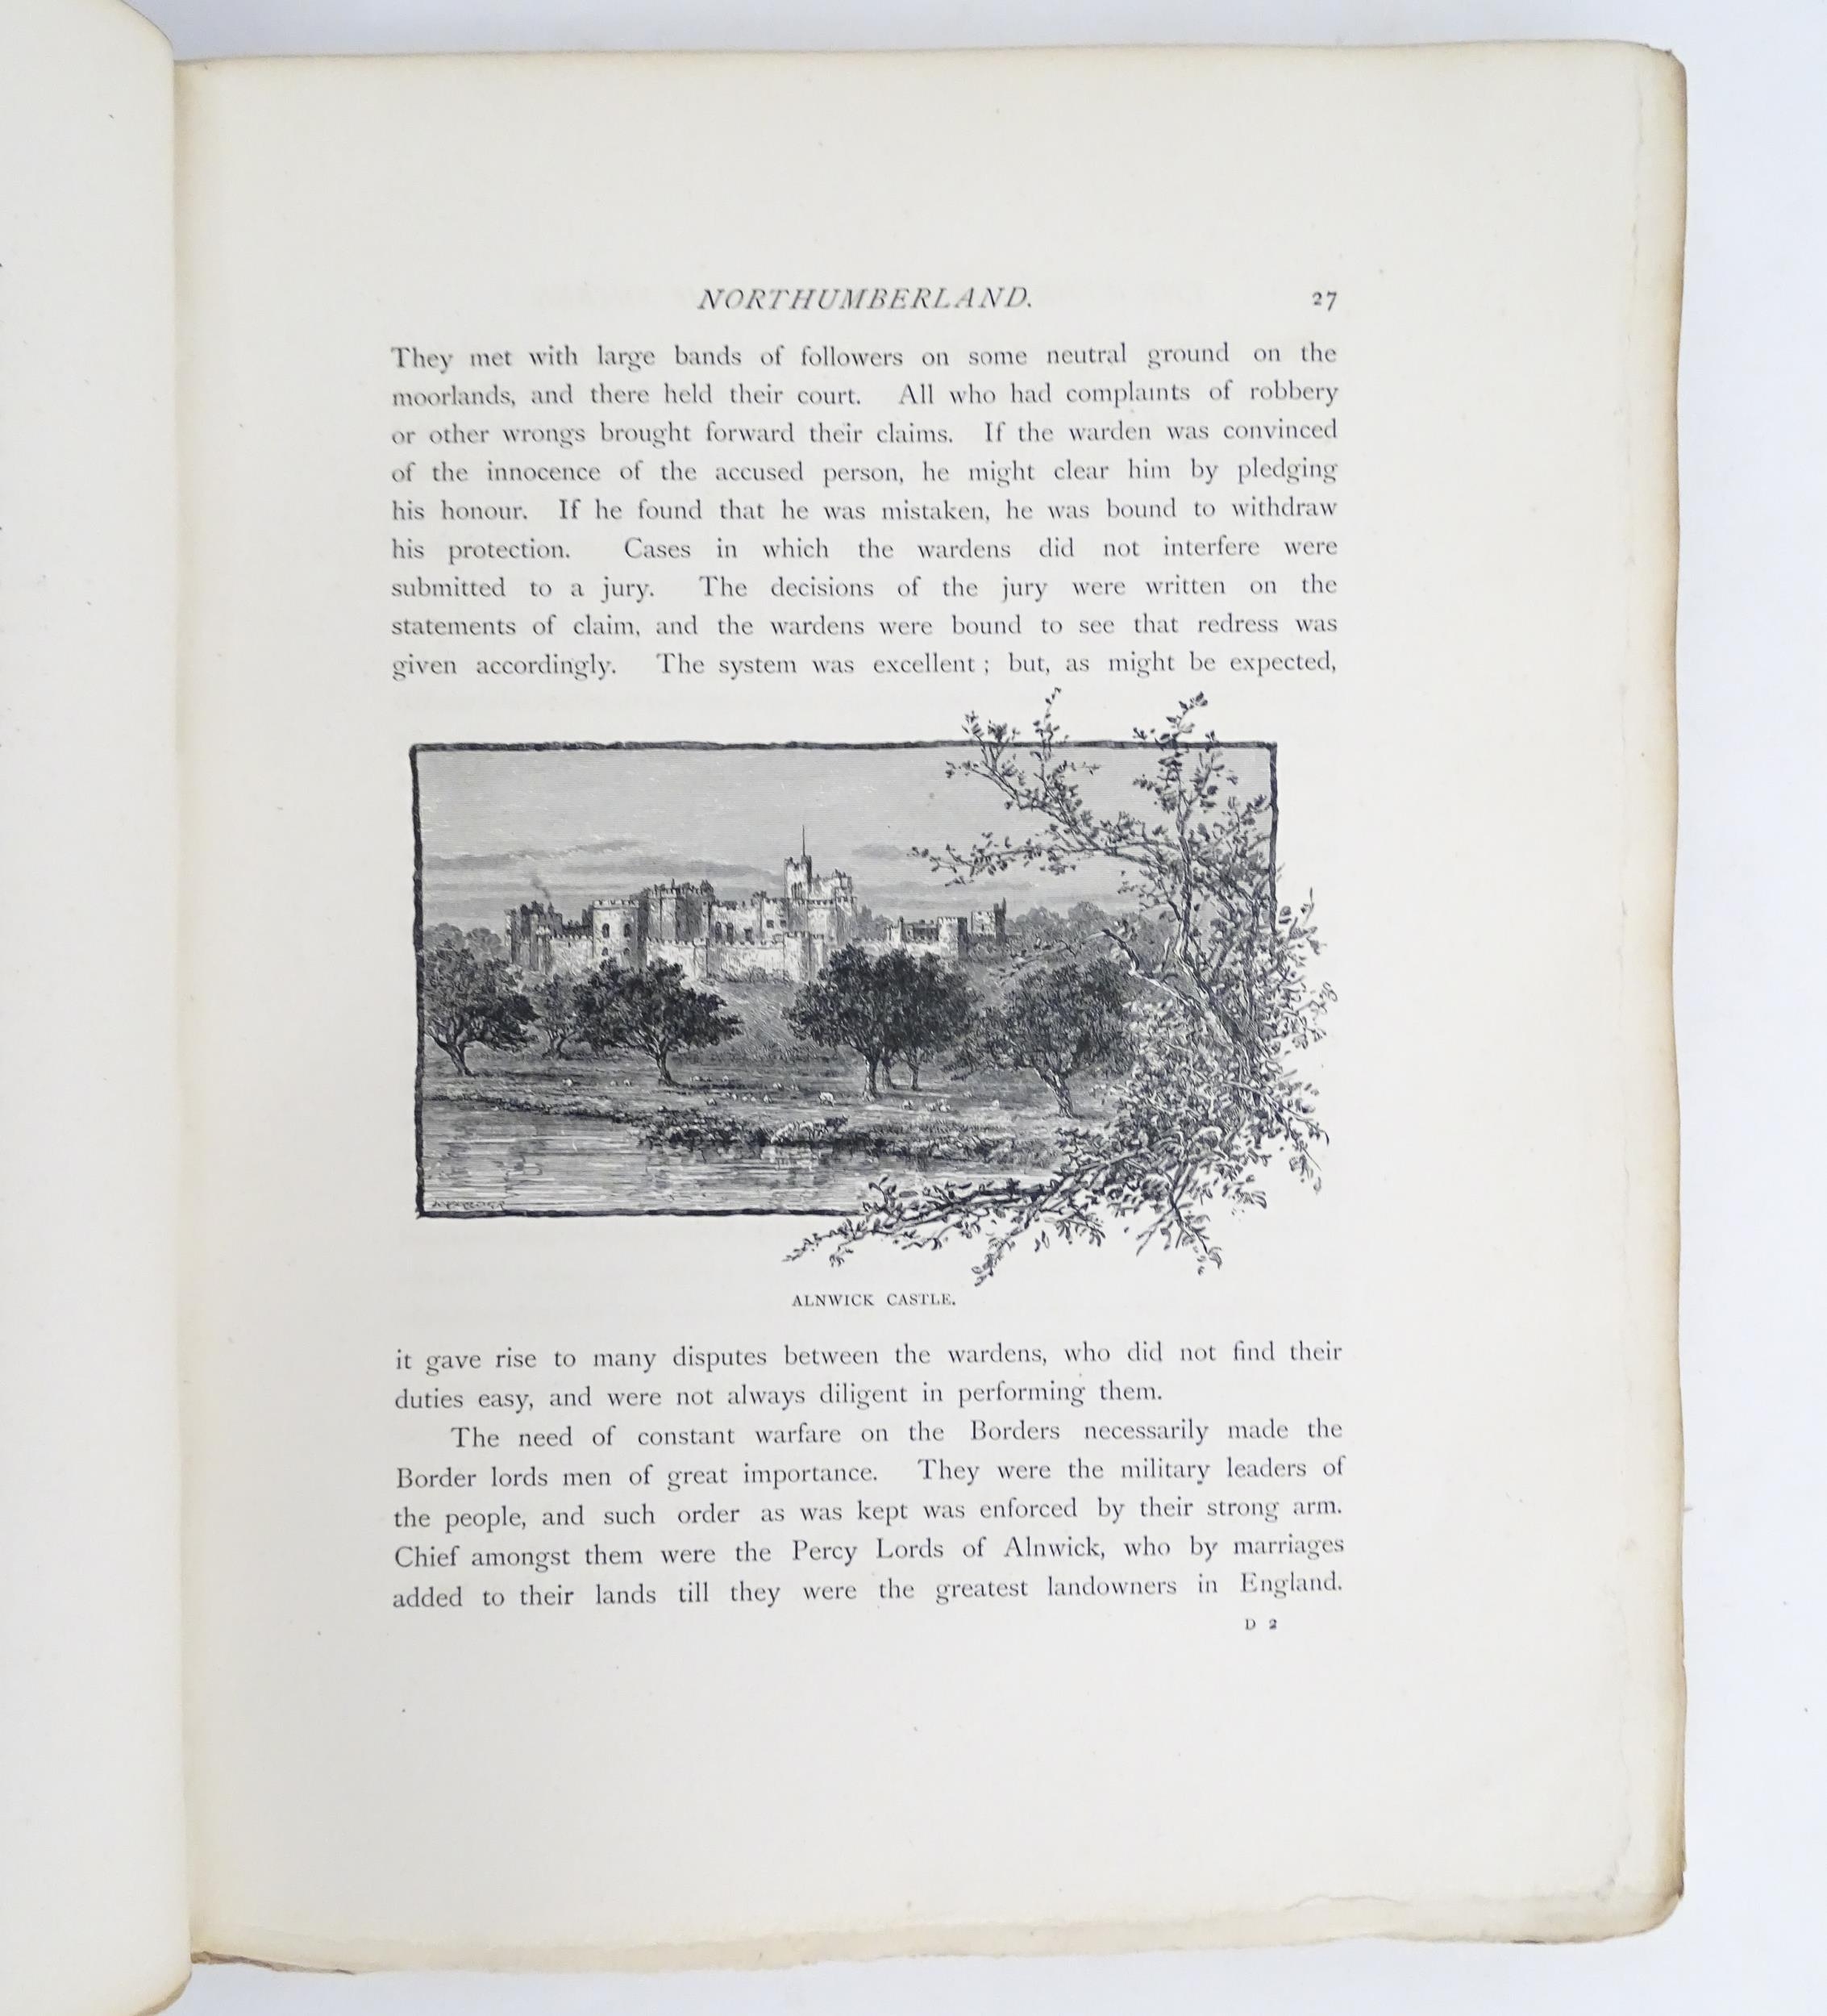 Book: The Story of Some English Shires by Mandell Creighton. Limited edition no. 105 / 150. - Image 7 of 9